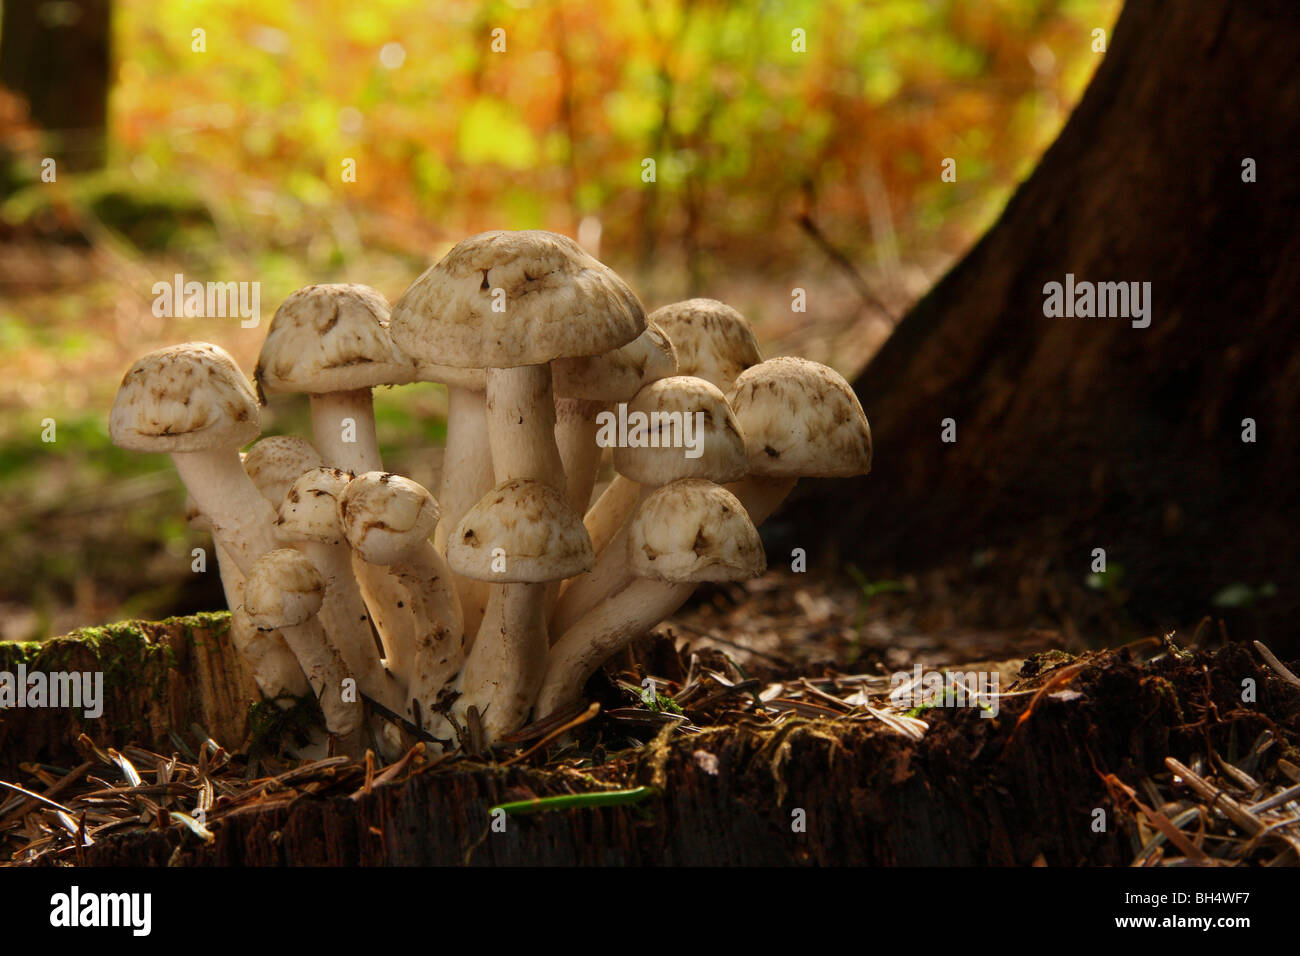 A clump of unidentified fungi growing on a tree stump in woodland. Stock Photo